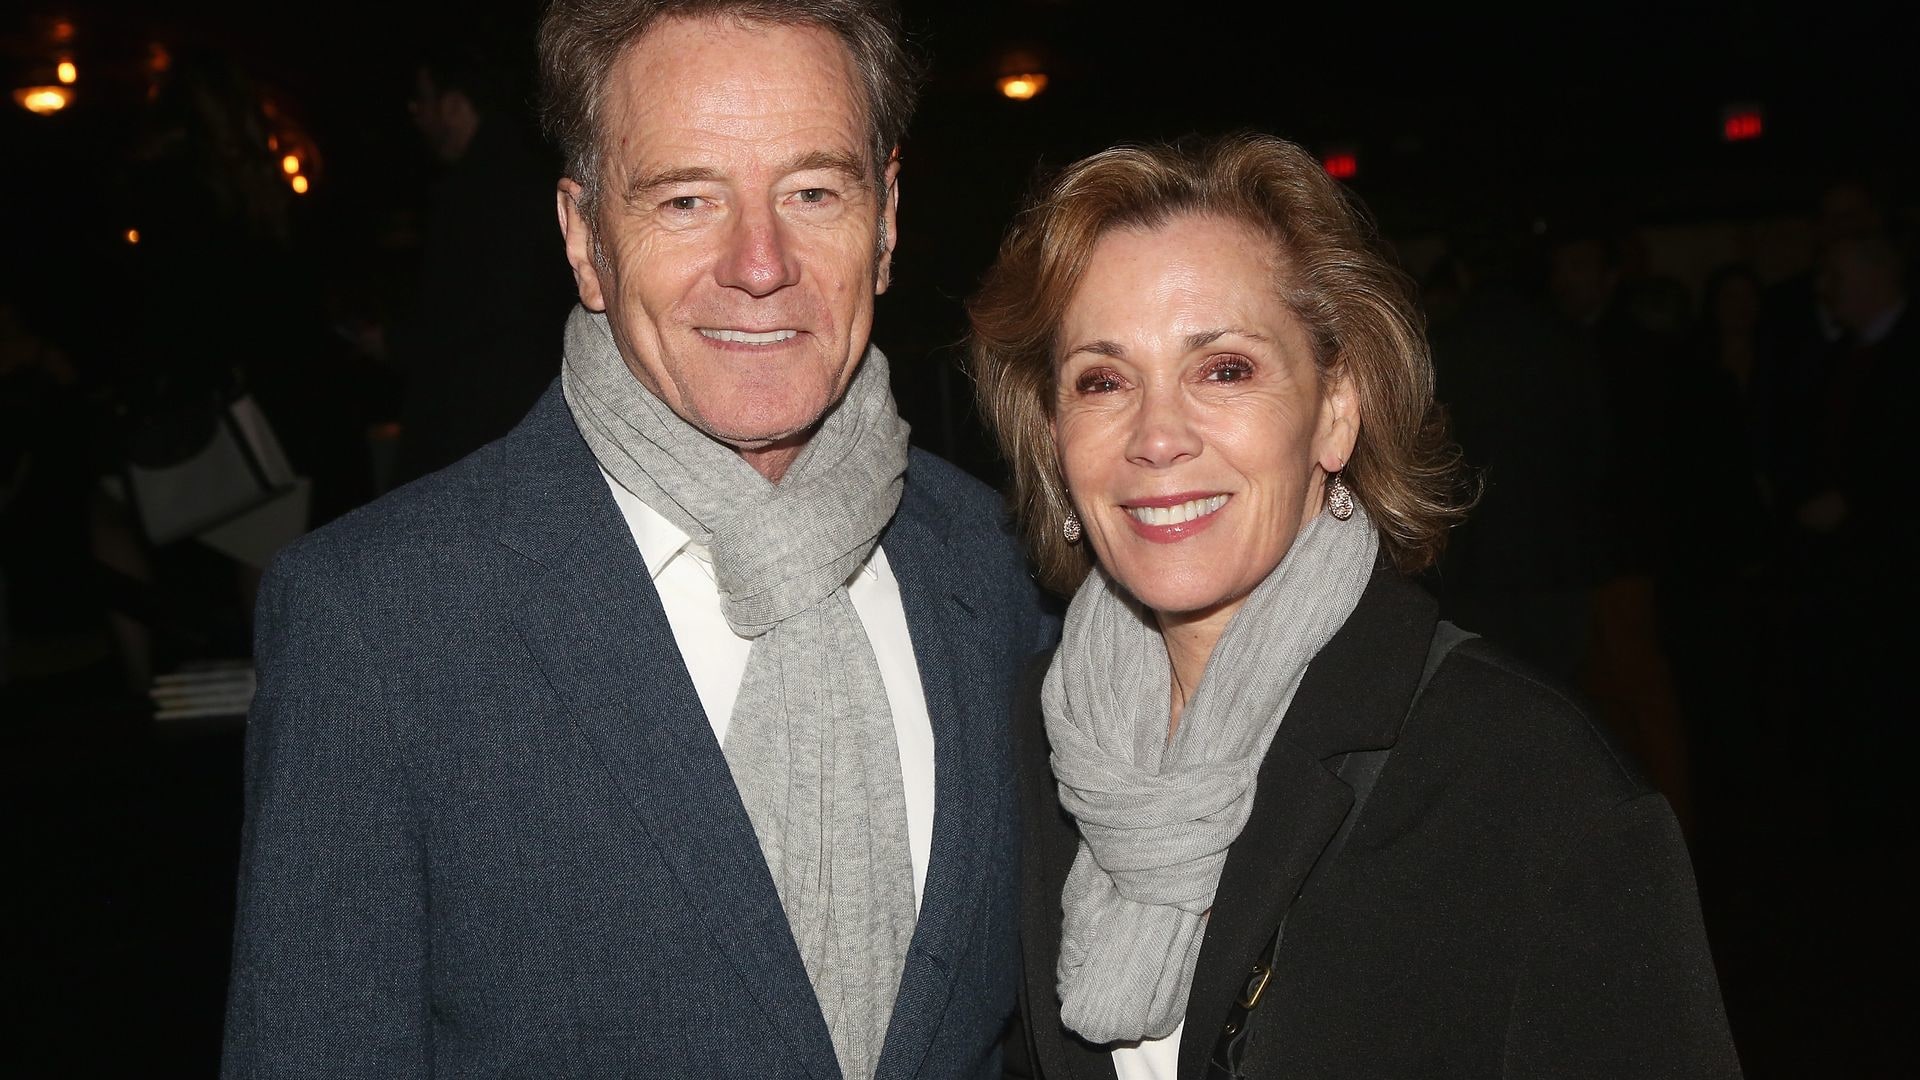 Breaking Bad’s Bryan Cranston plans radical move to focus on his marriage